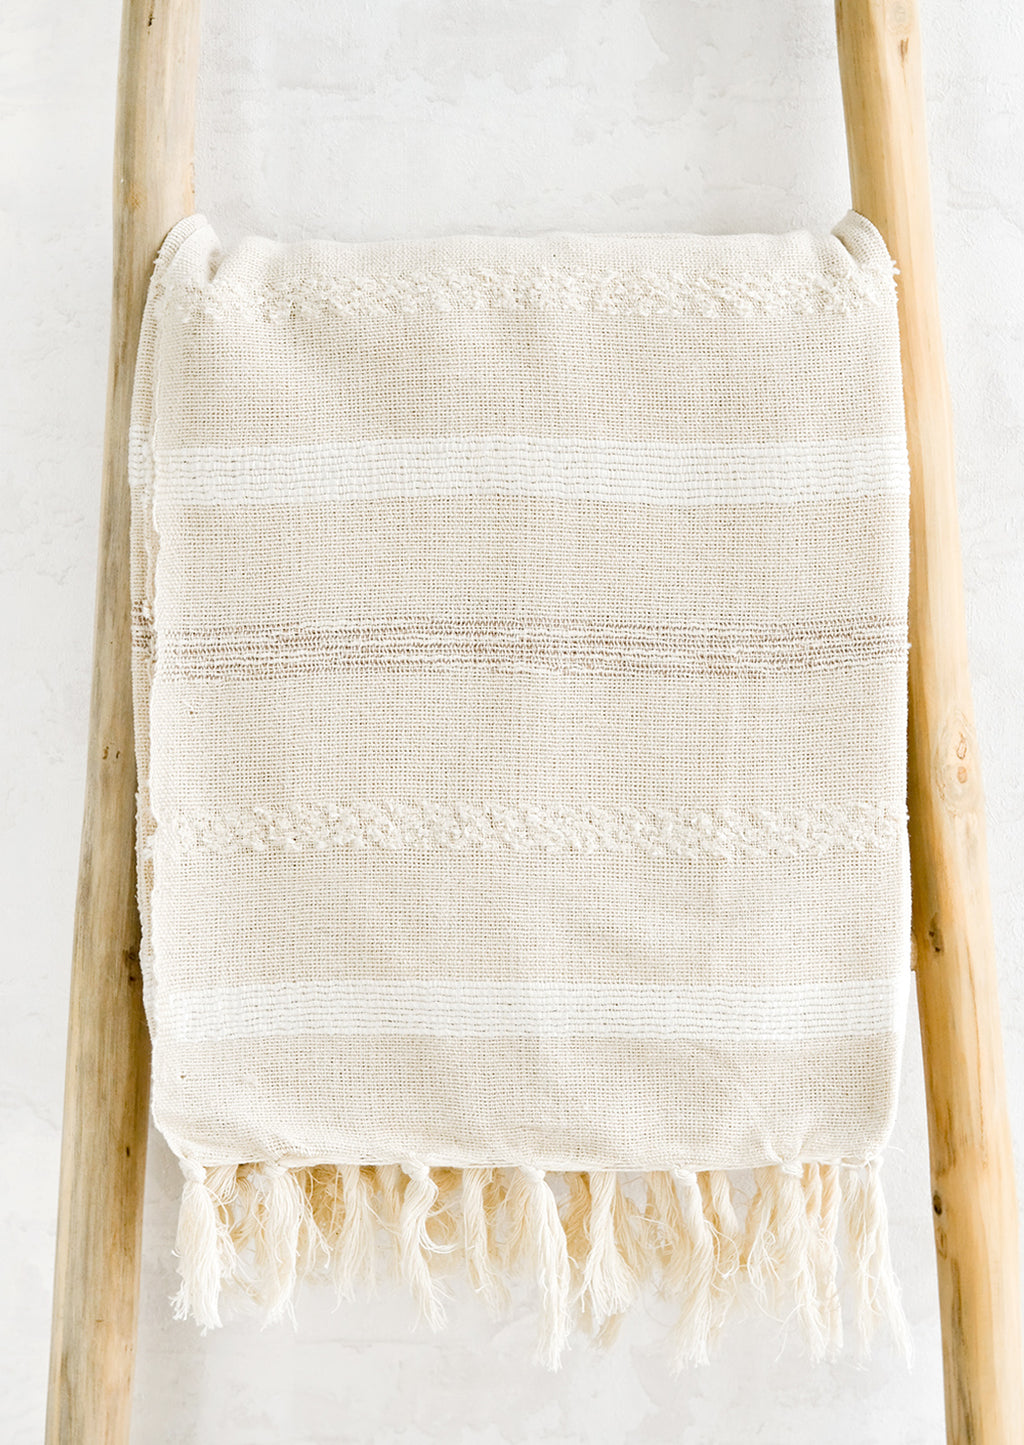 White Multi: A woven cotton gauze blanket with textured stripes in white on a display ladder.